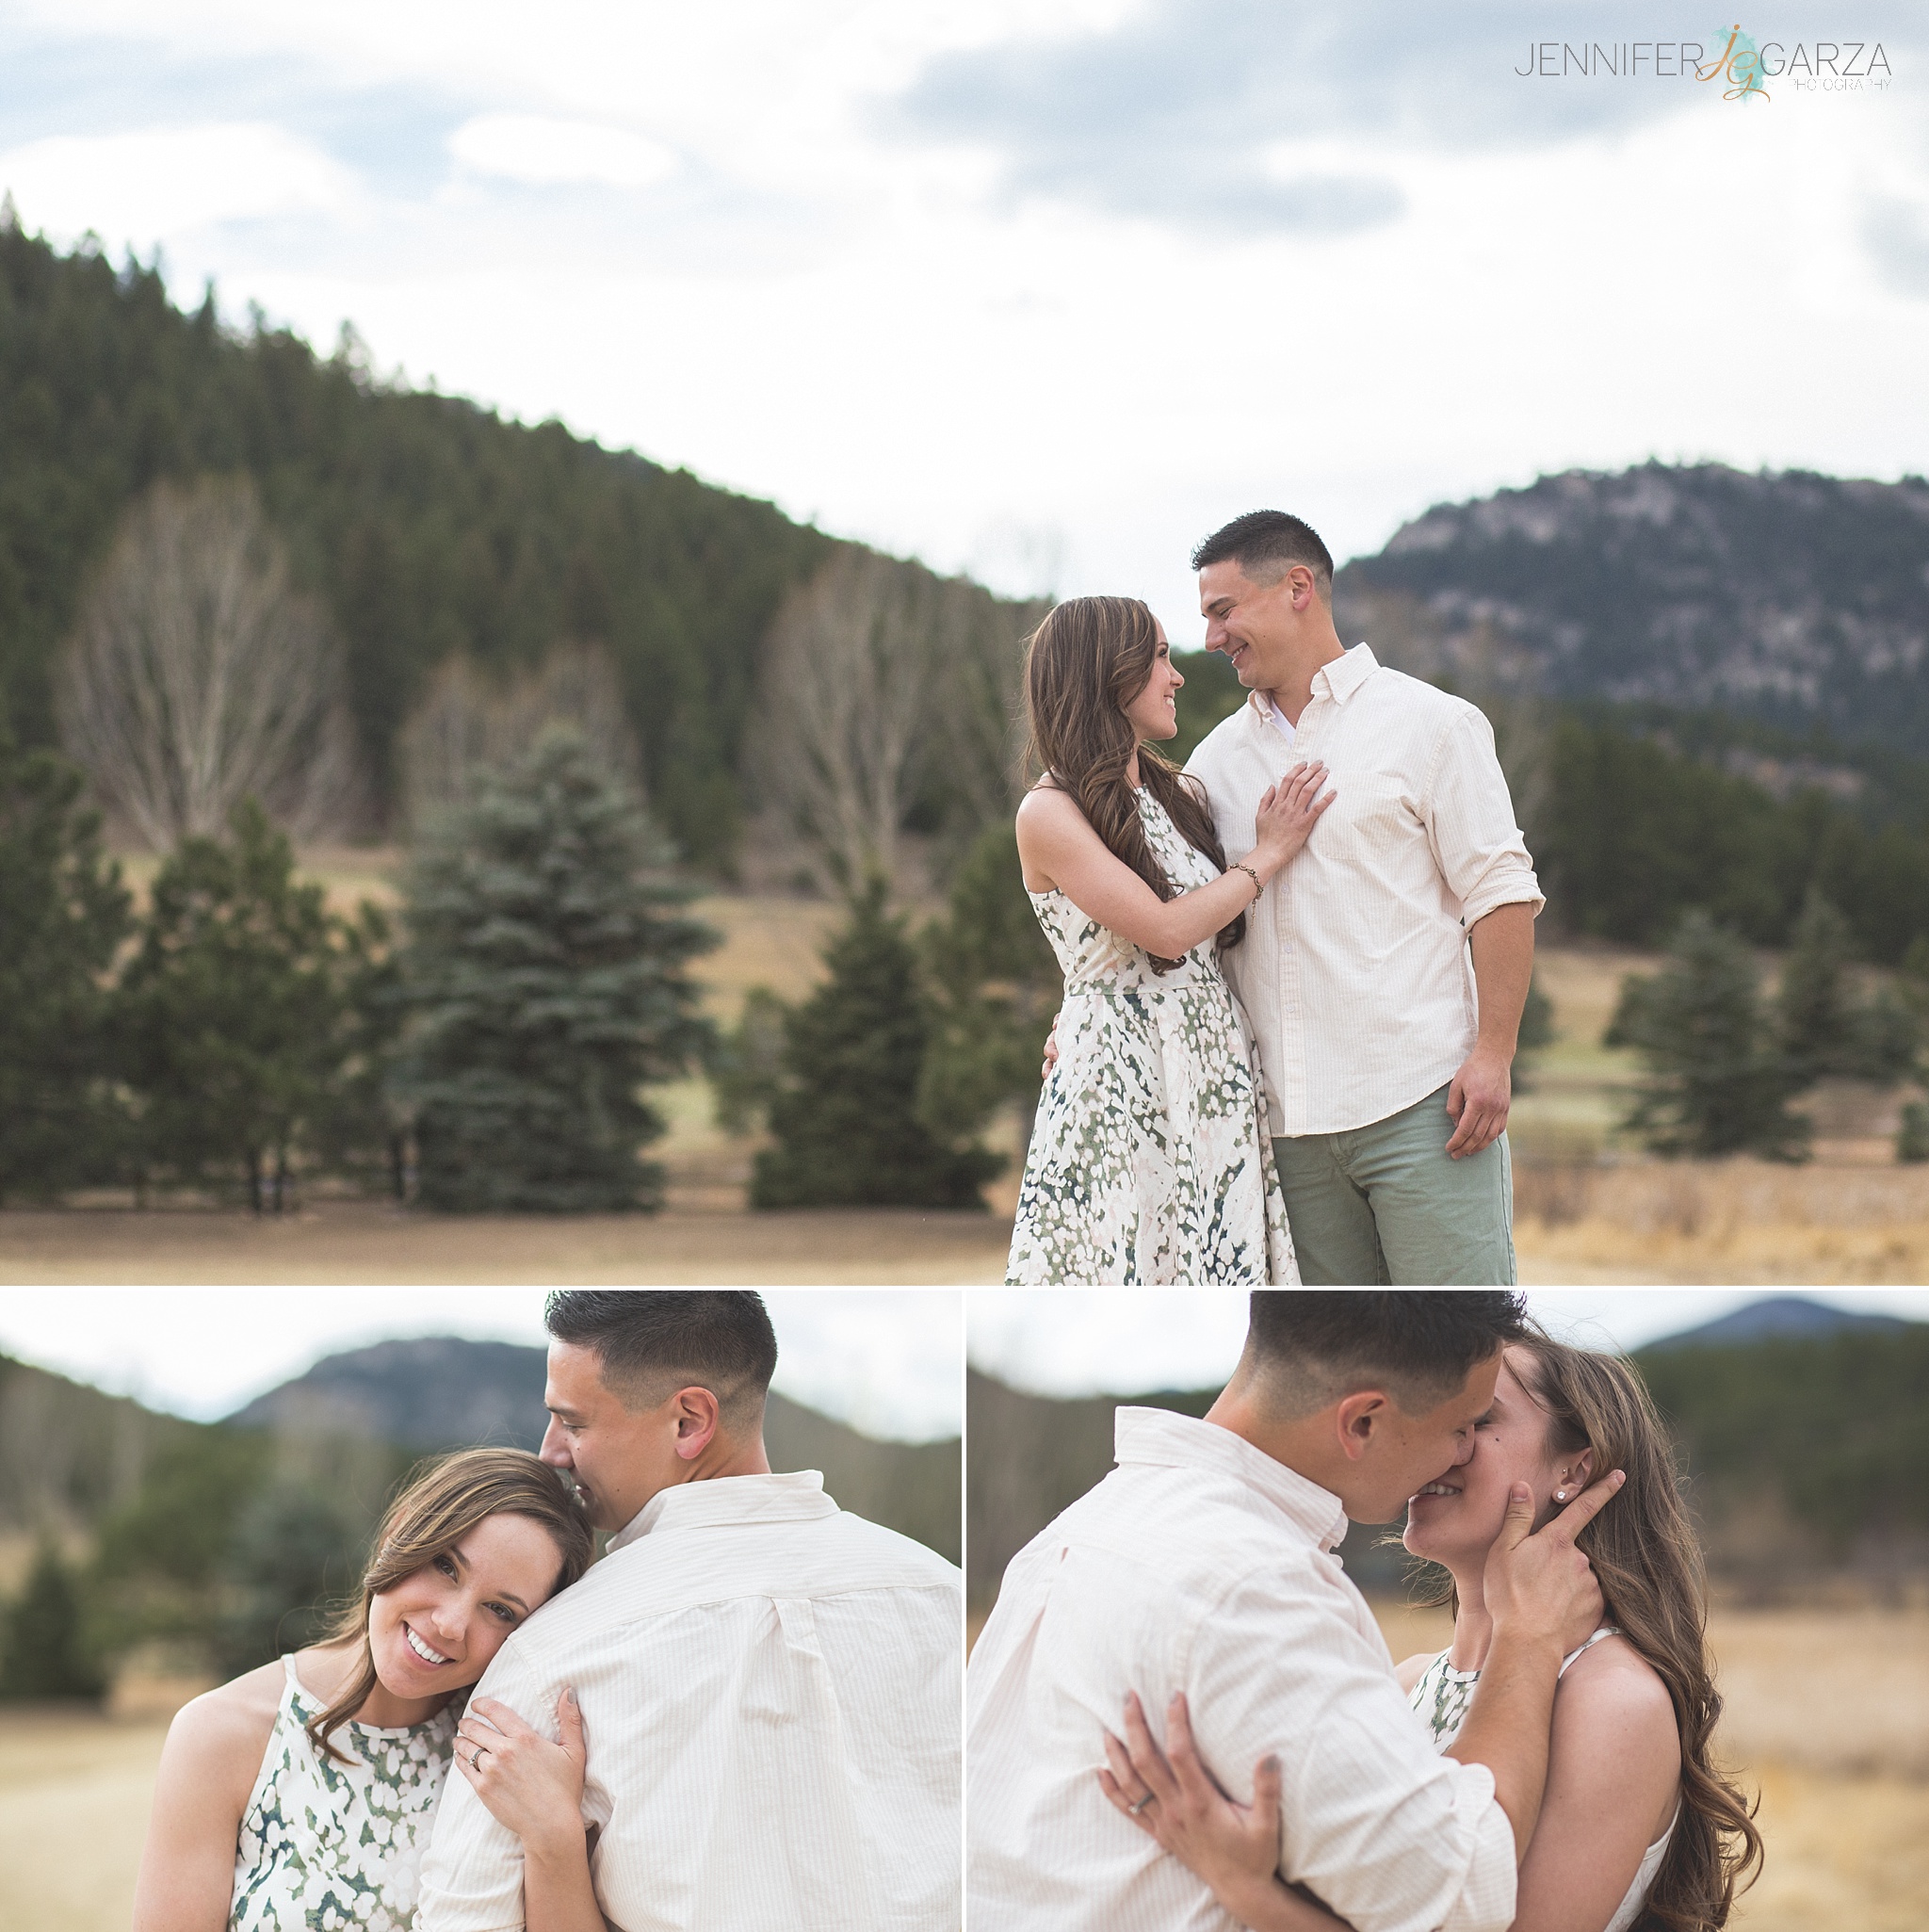 Brooke & Aaron had a great time during their Epic Engagement Shoot at Evergreen Lake House.